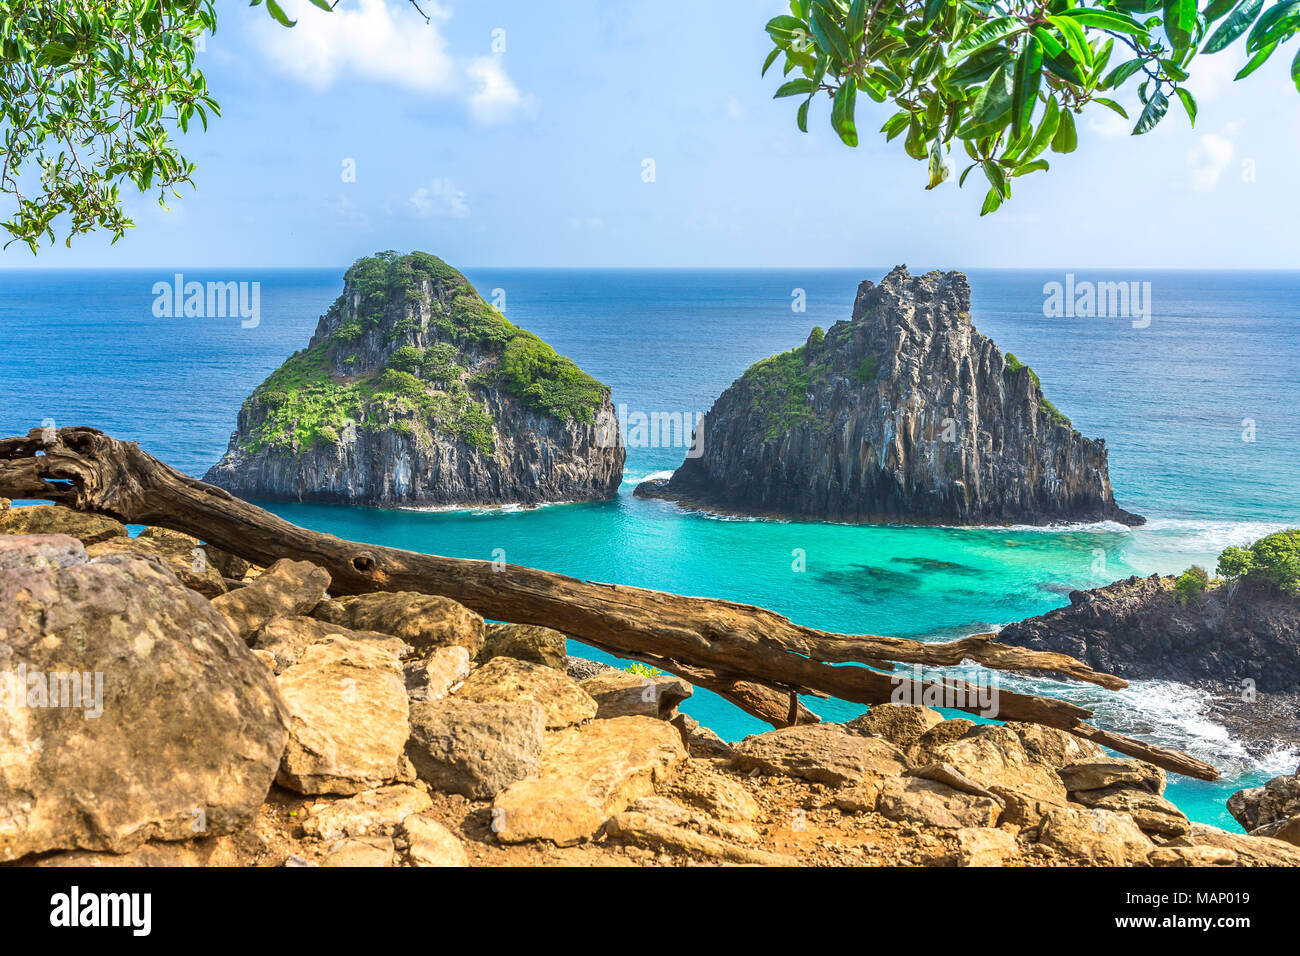 Fernando de Noronha, Brazil. View of Morro dos Dois Irmaos with gains and plants in the foreground. Stock Photo